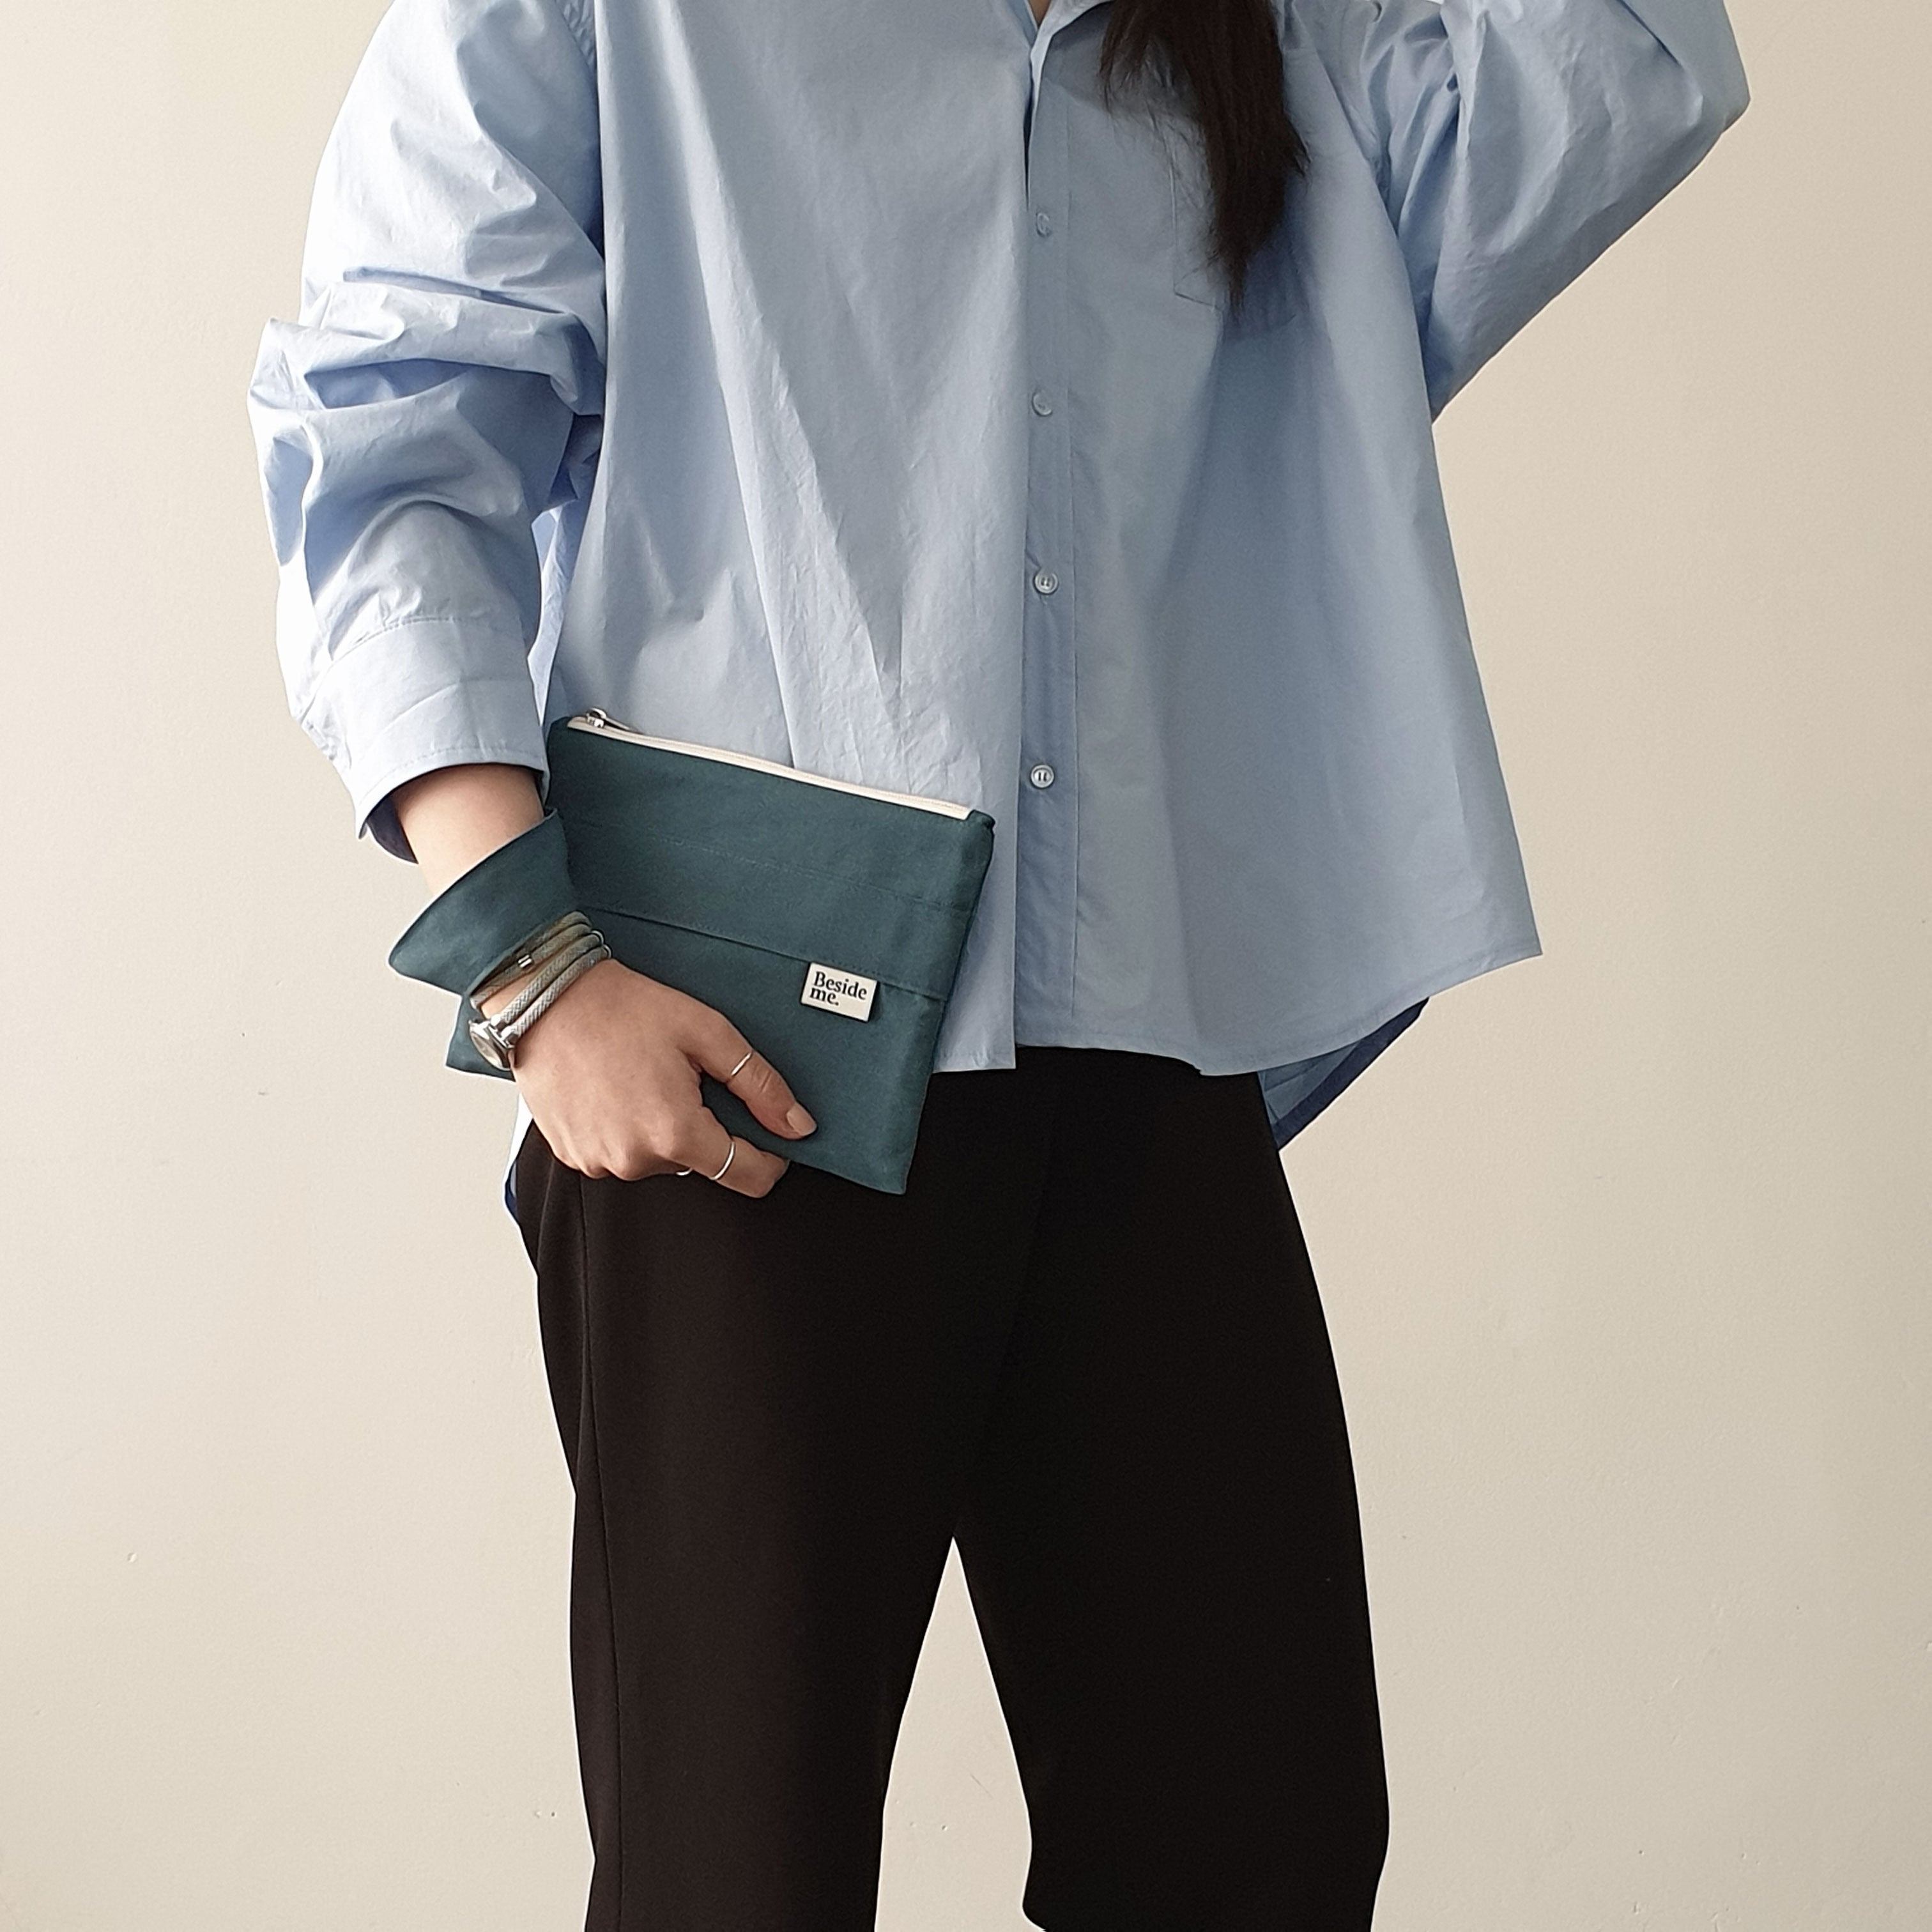 Oxford simple line strap pouch - teal blue